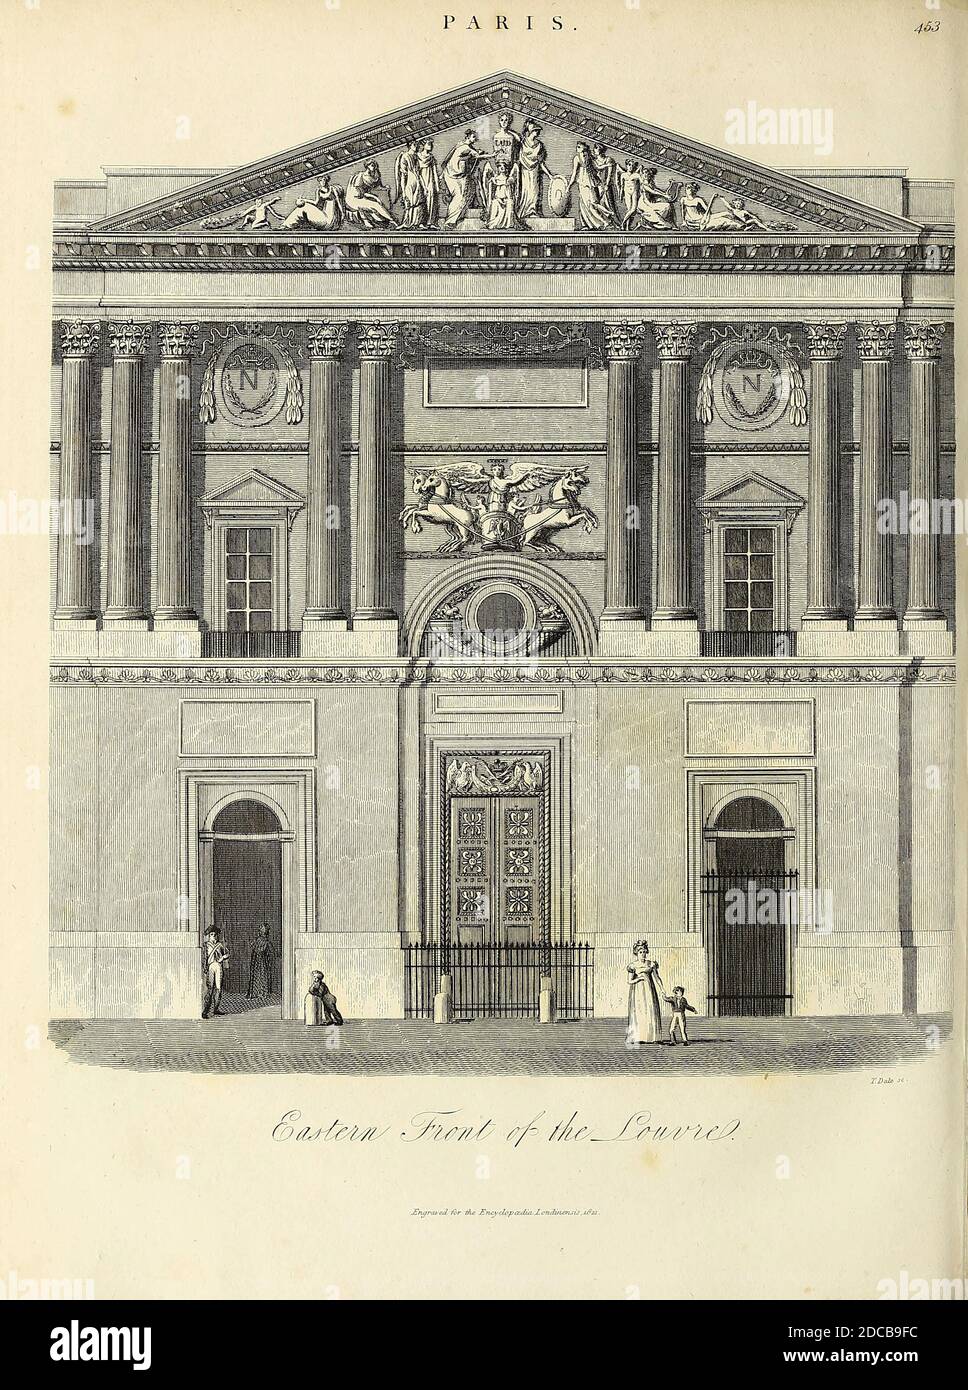 19th Century illustration of the Eastern front of the Louvre, Paris, France Copperplate engraving From the Encyclopaedia Londinensis or, Universal dictionary of arts, sciences, and literature; Volume XVIII;  Edited by Wilkes, John. Published in London in 1821 Stock Photo